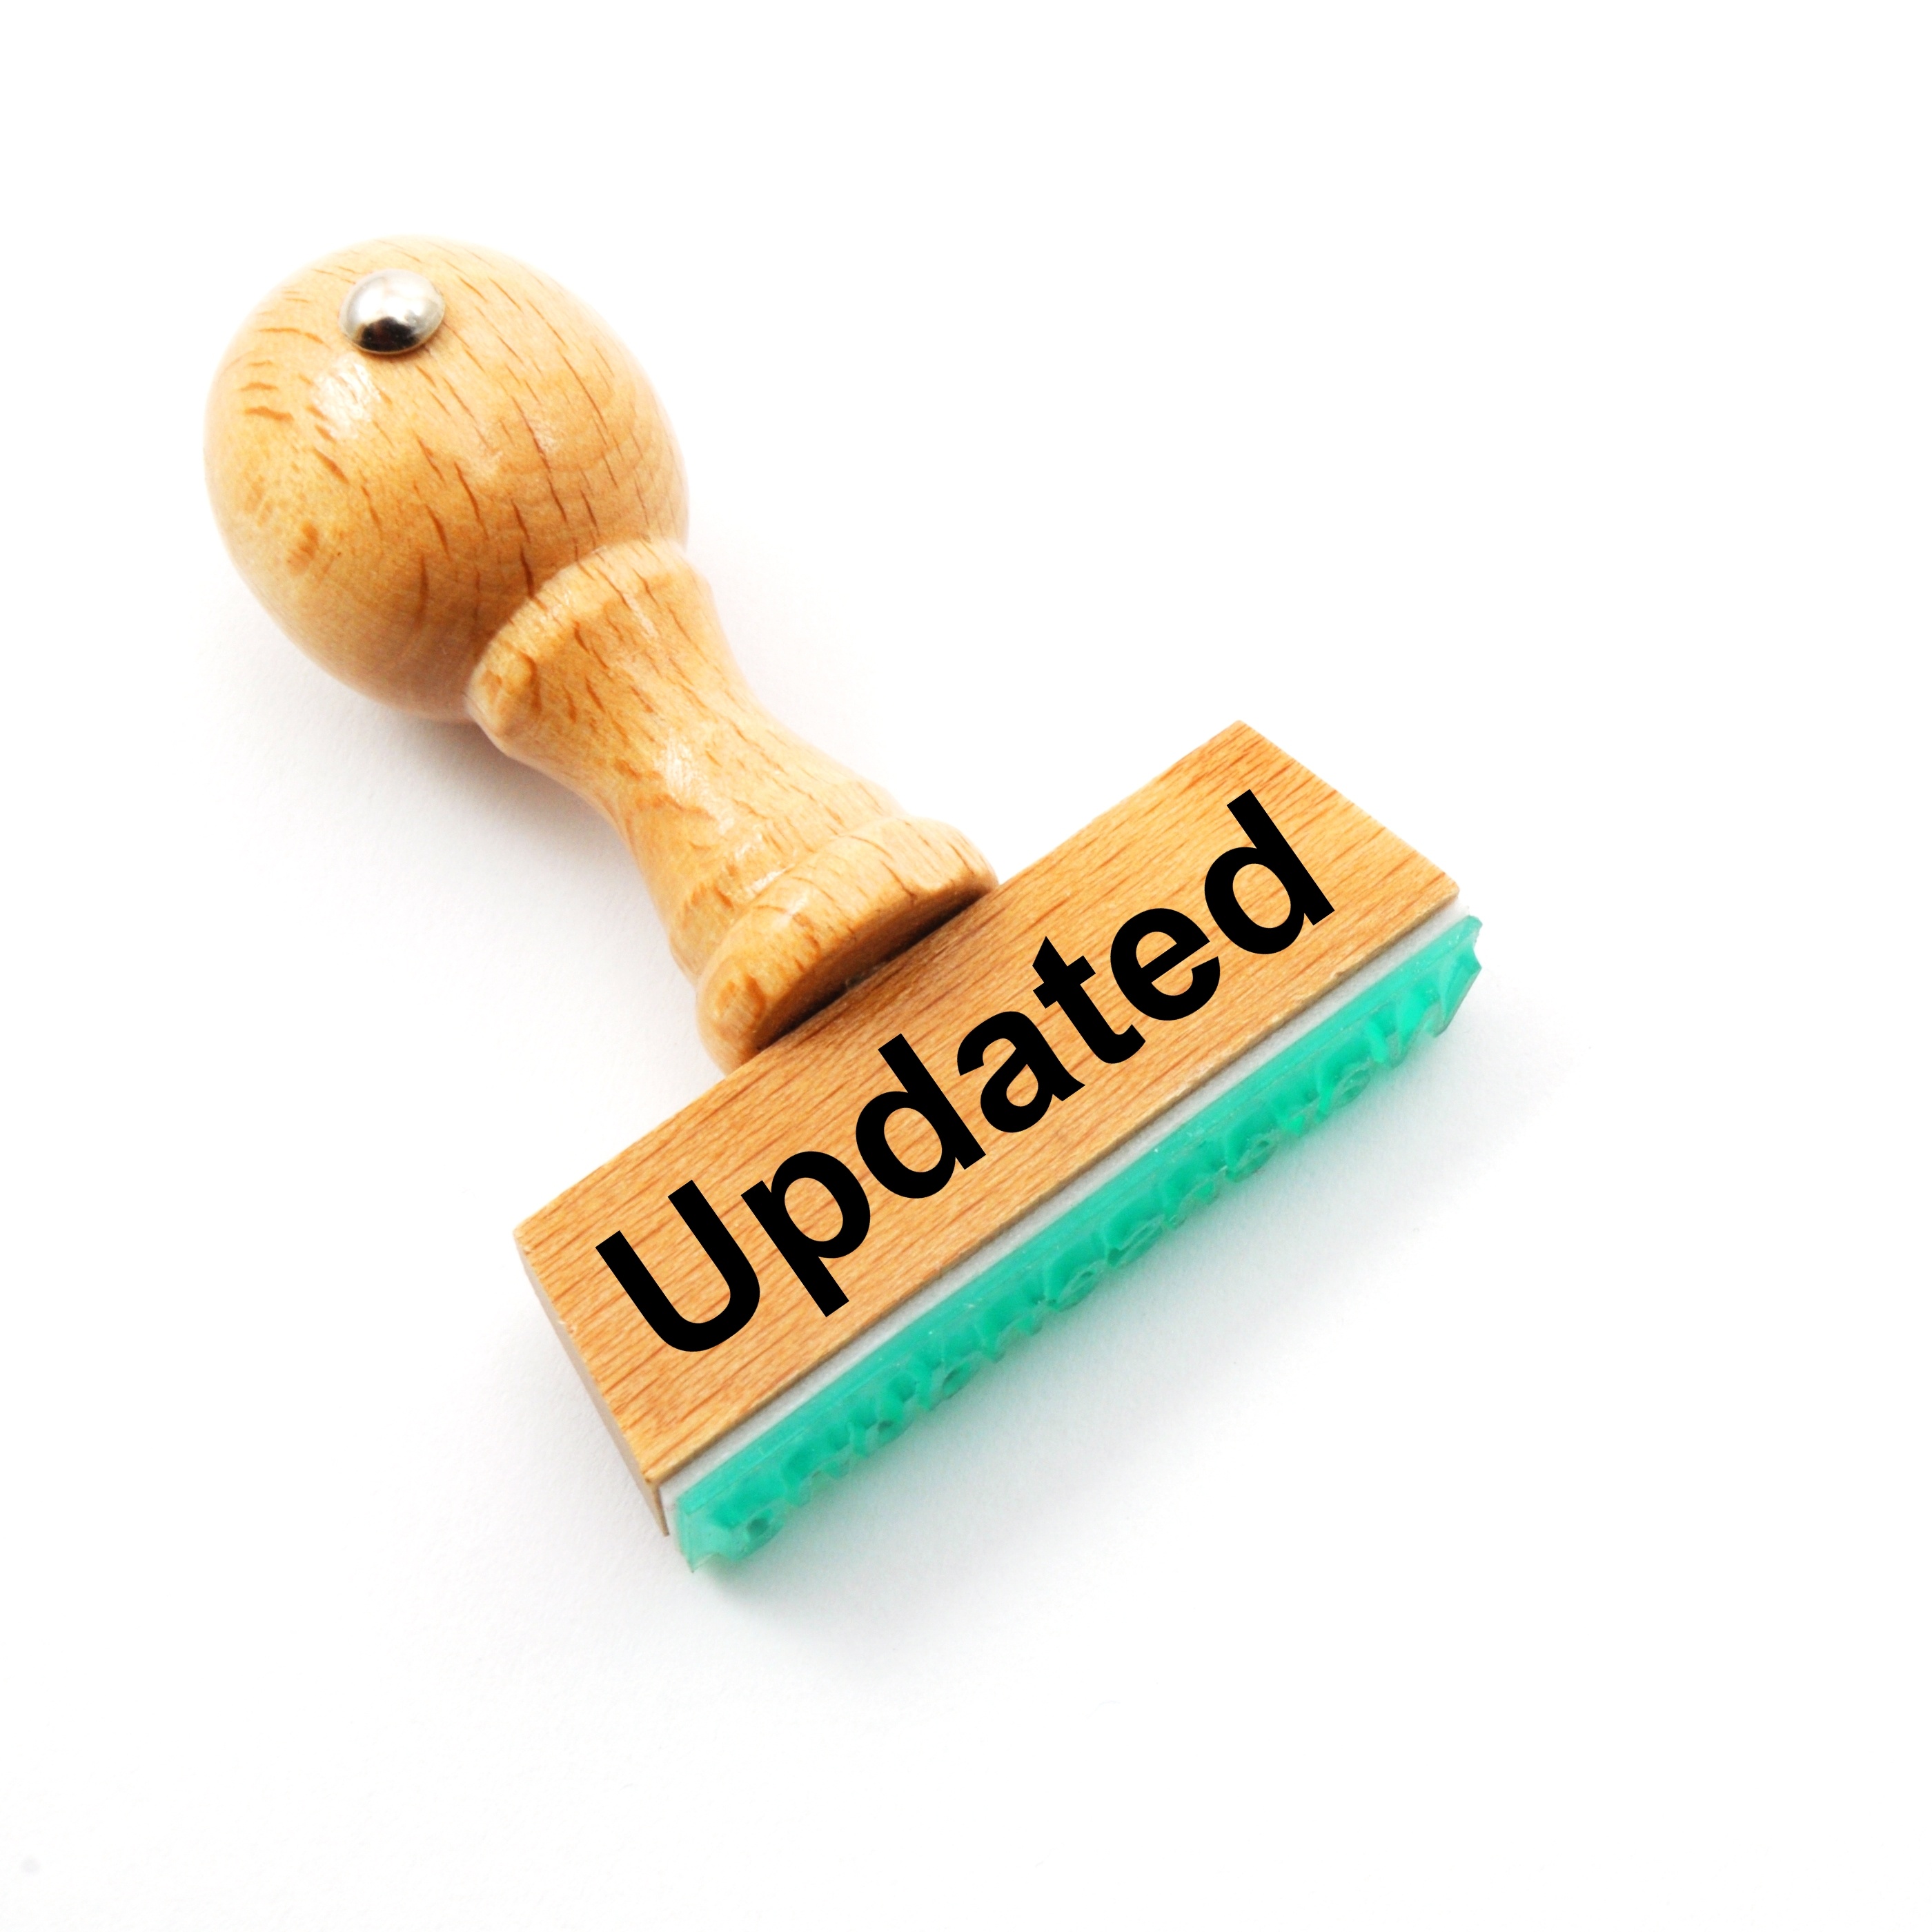 A woodblock ink stamp that reads "Updated"